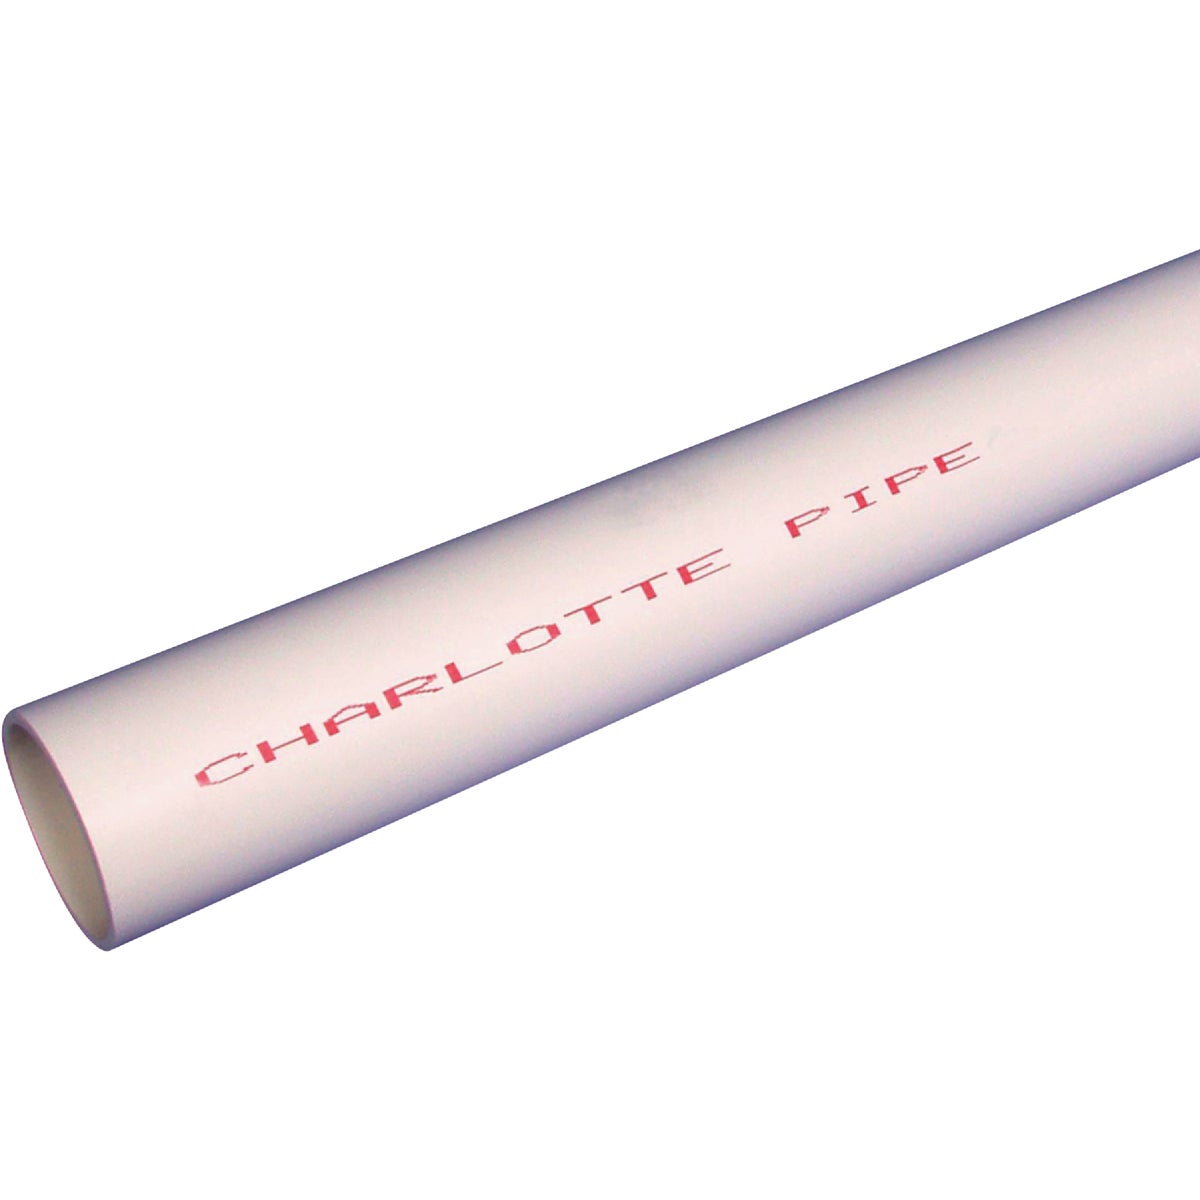 Charlotte Pipe 3/4 In. x 10 Ft. Cold Water Schedule 40 PVC Pressure Pipe